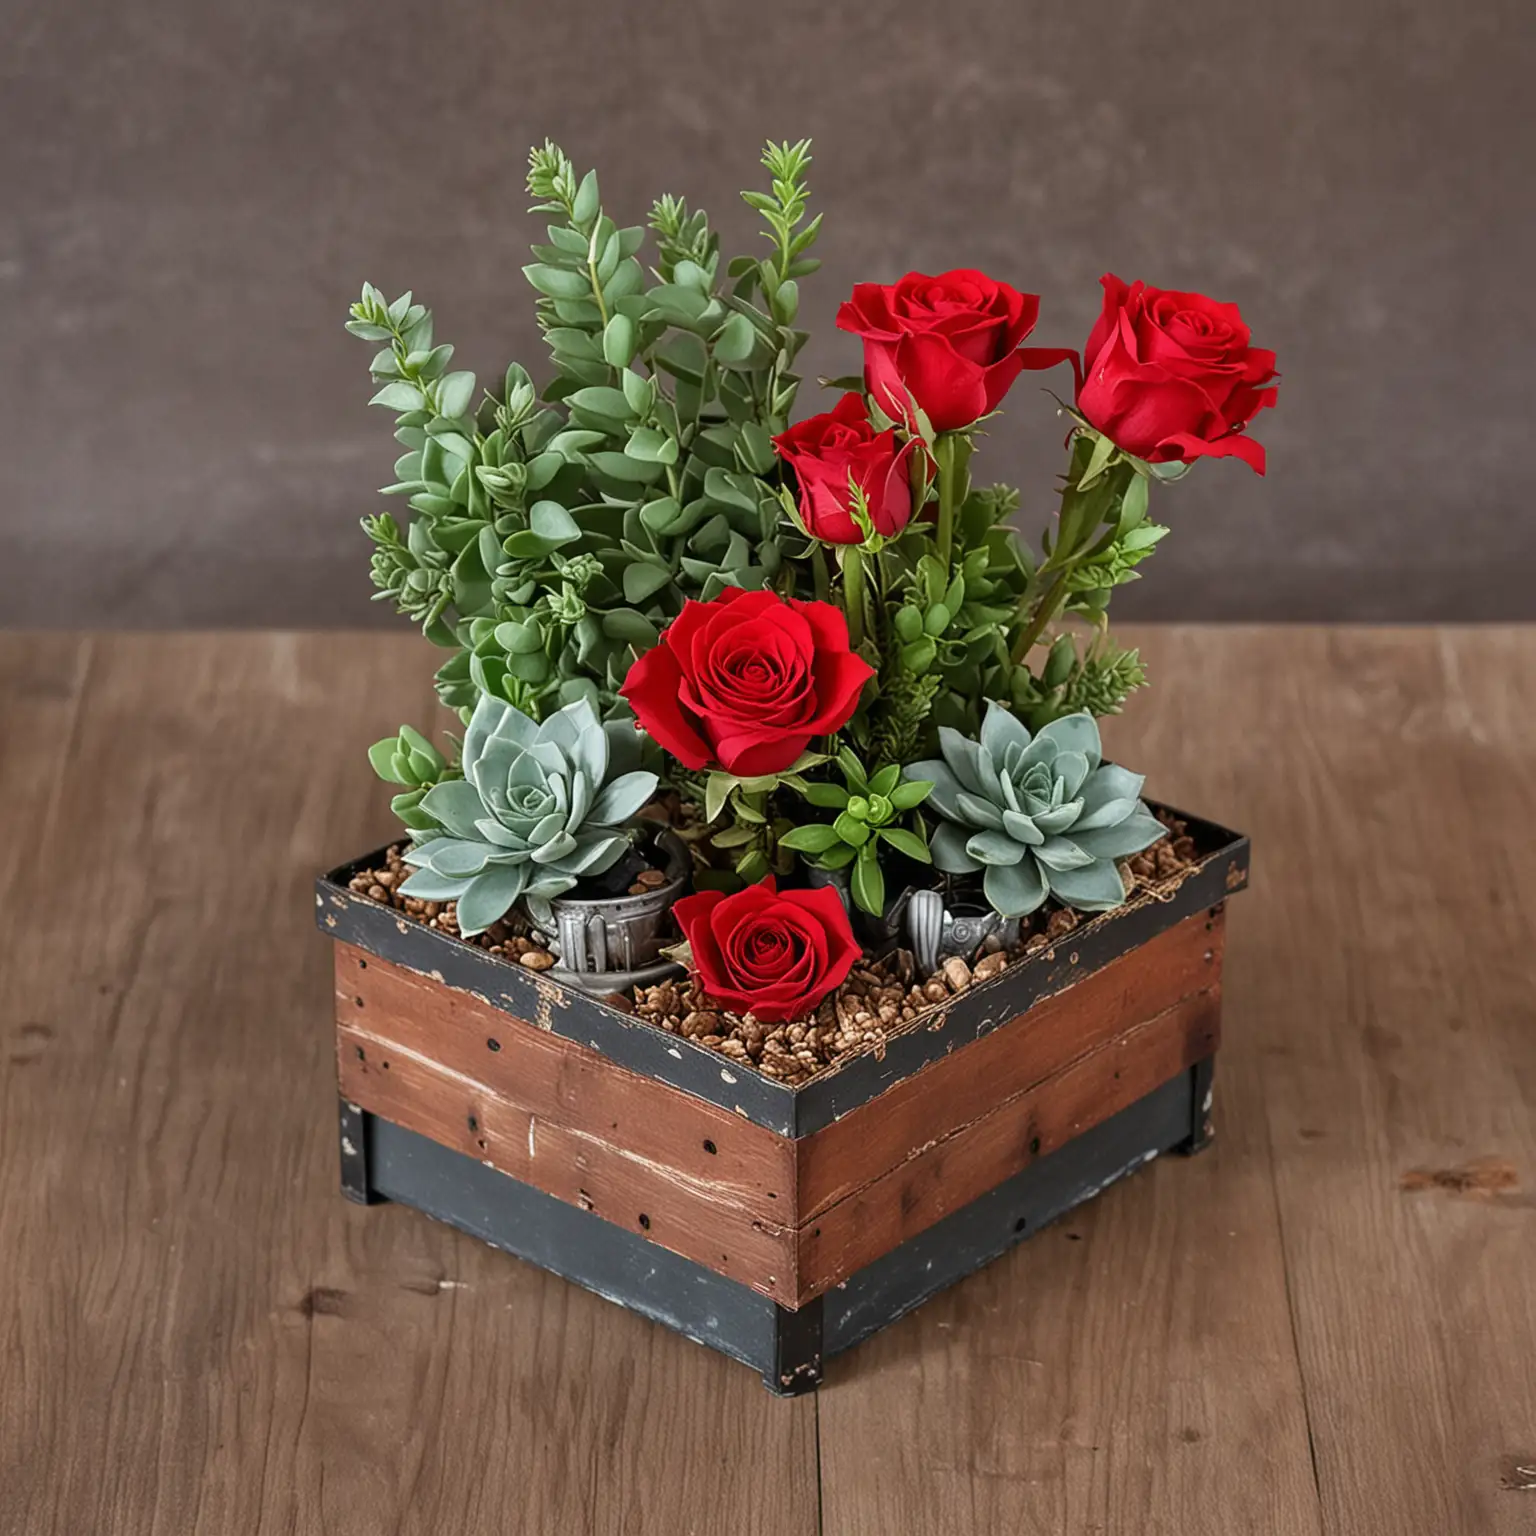 DIY-Industrial-Wedding-Centerpiece-Red-Roses-and-Succulents